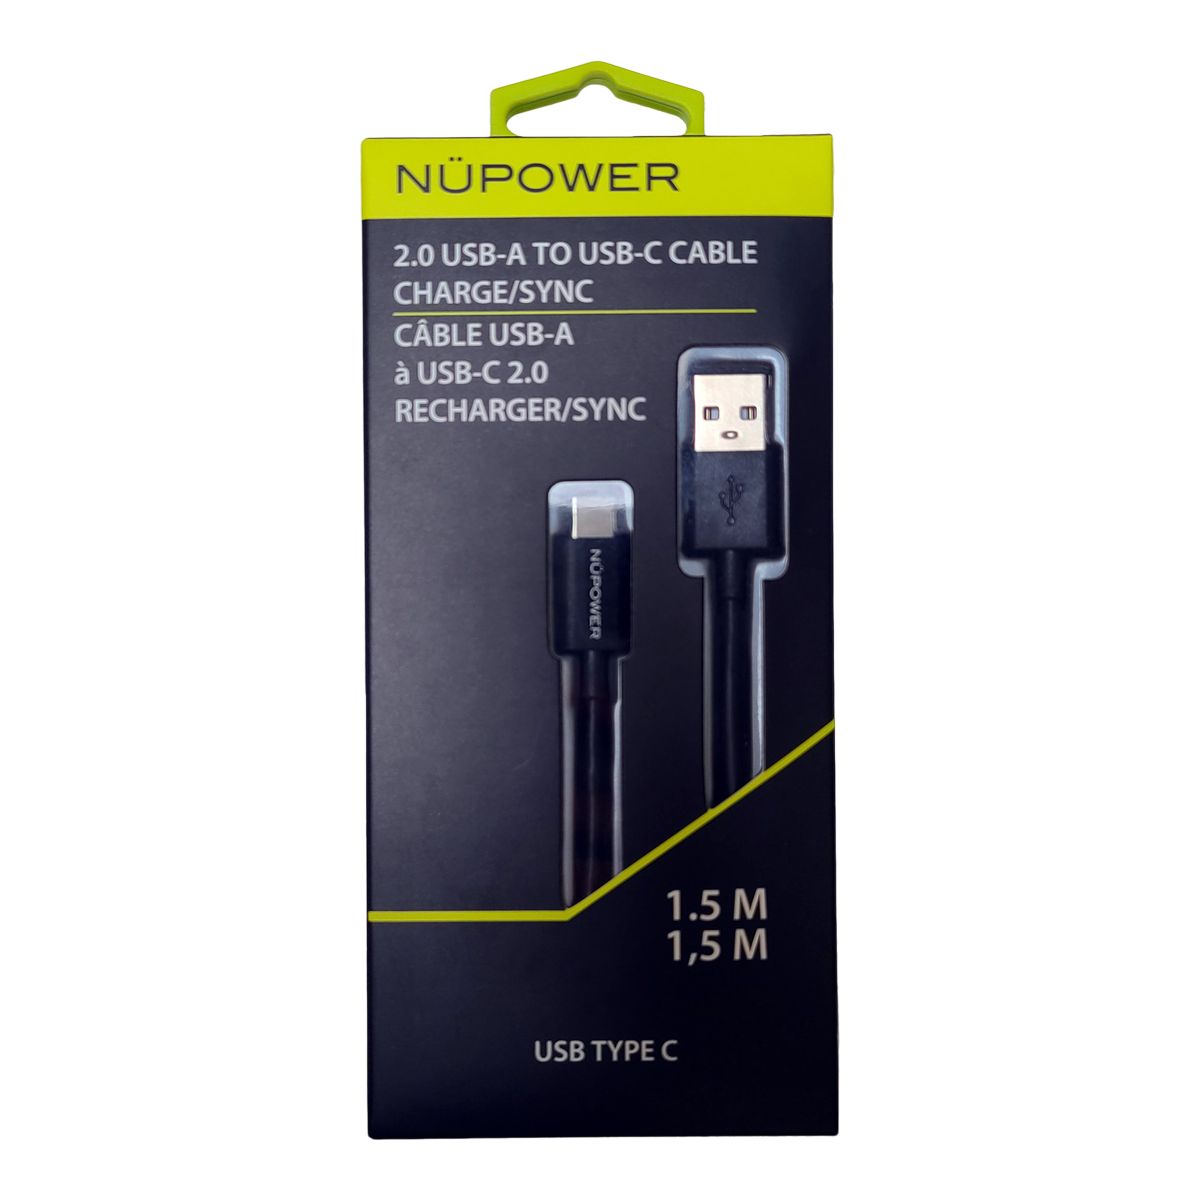 NuPower 1.5M Charge/Sync USB Type C Cable